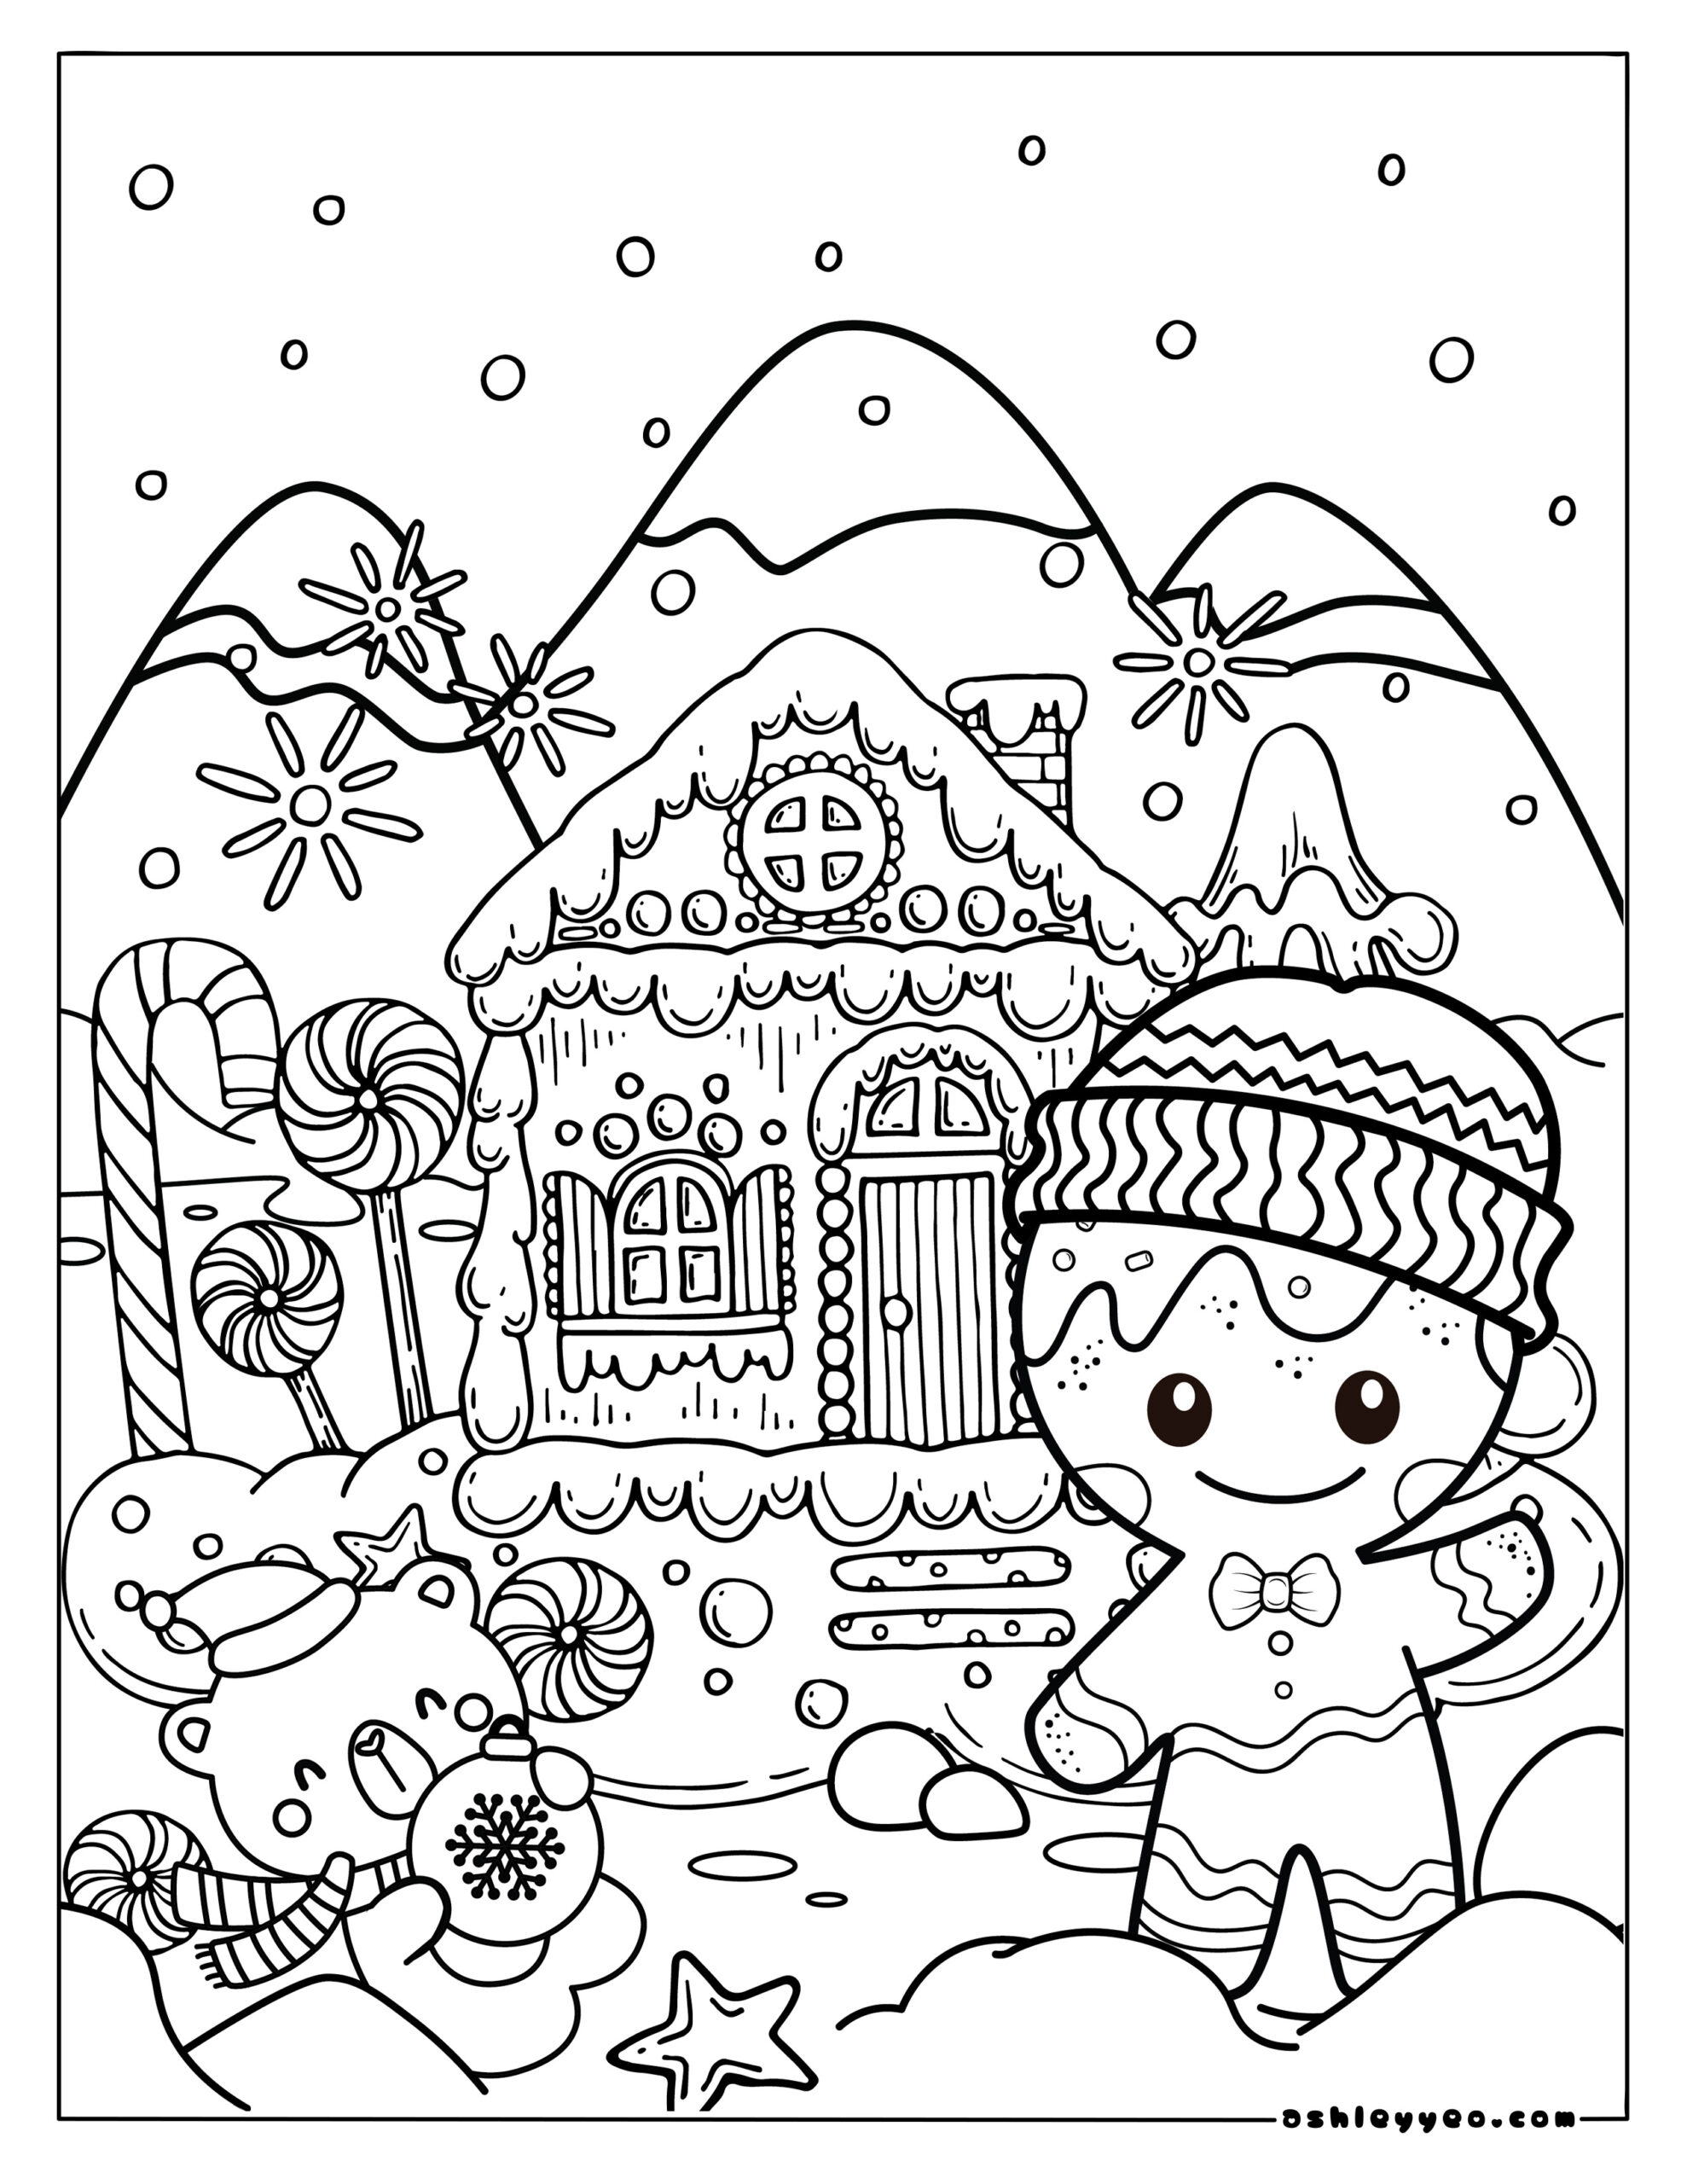 Christmas Coloring Books For Adults Relaxation: coloring pages with funny  images to Relief Stress for kids and adults (Paperback)